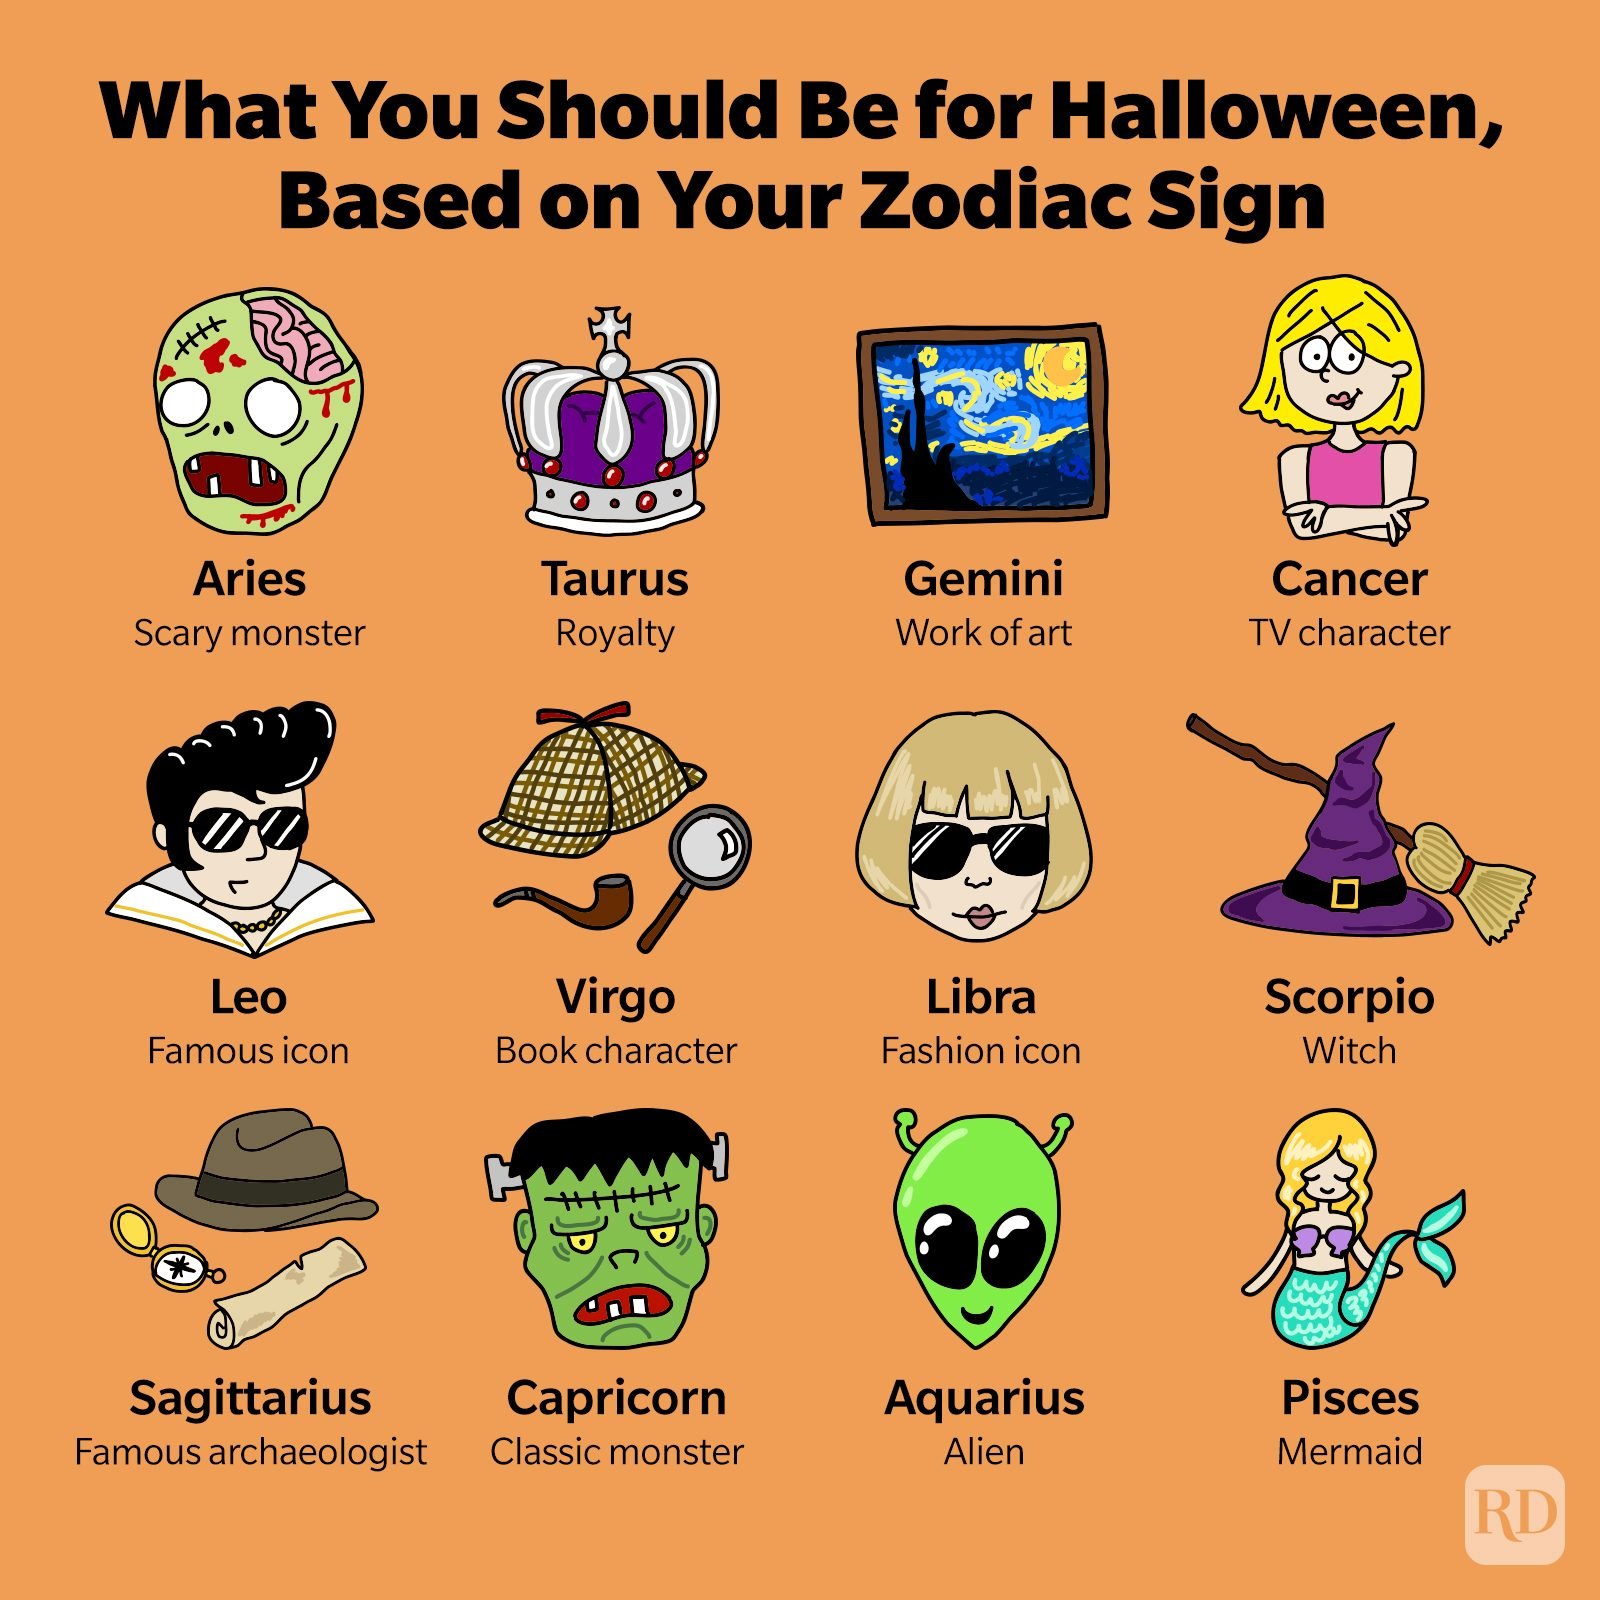 What You Should Be For Halloween Based On Your Zodiac Sign Infographic